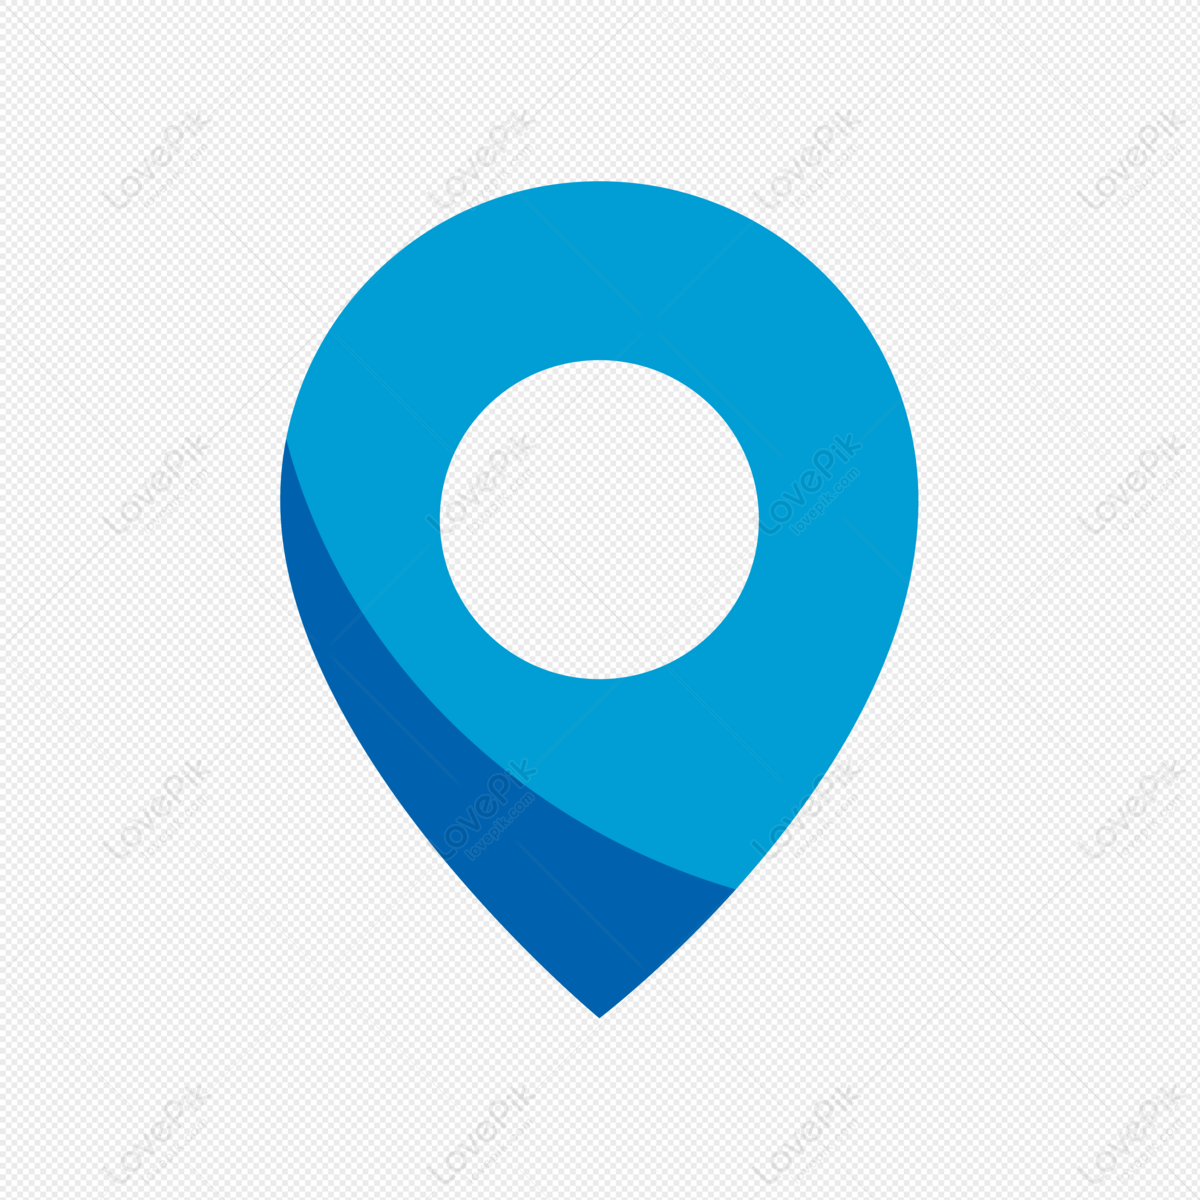 Map Location Icon PNG Transparent Image And Clipart Image For Free ...